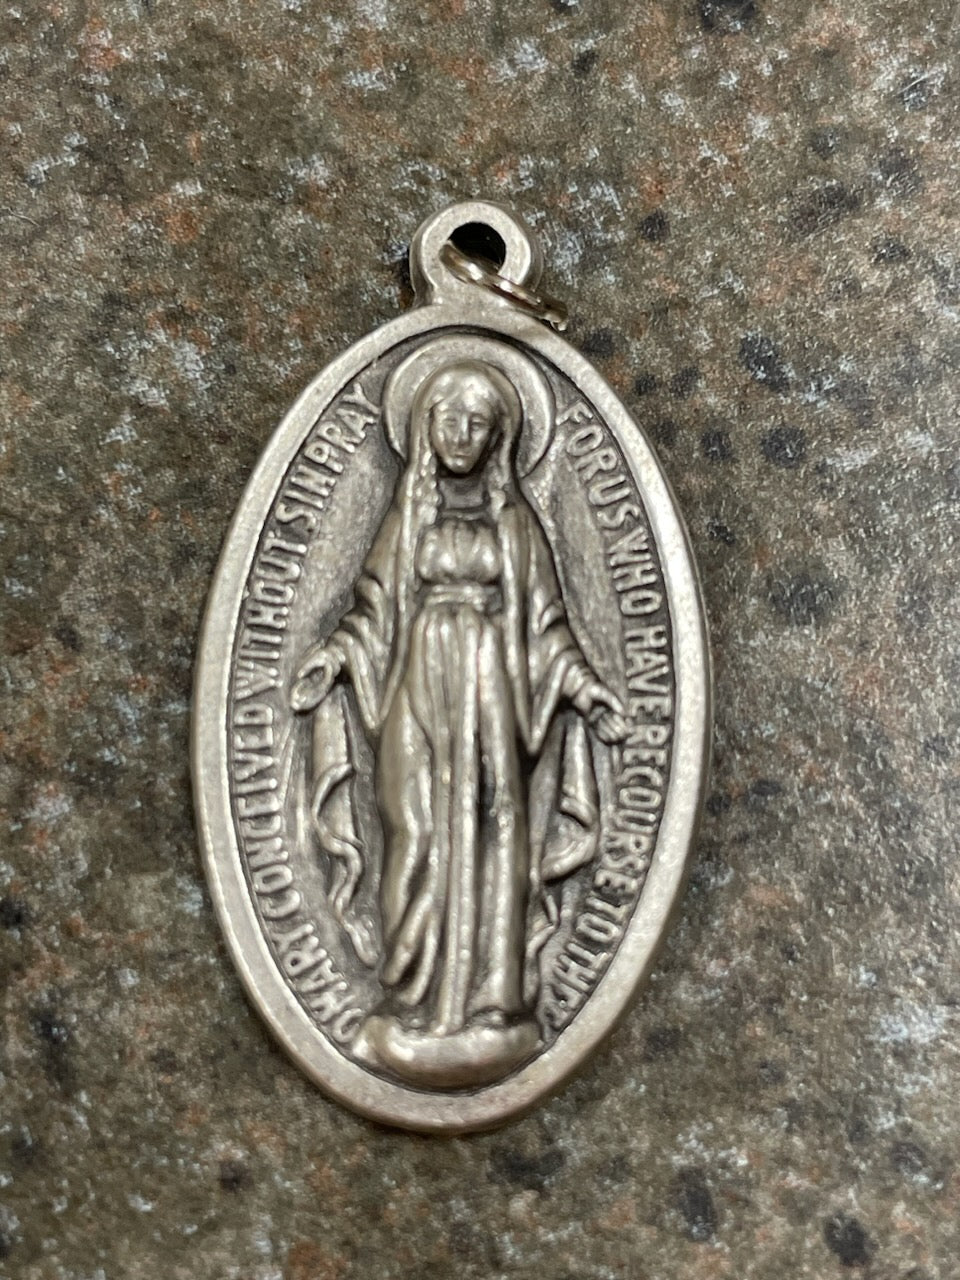 LARGE 1.5" MIRACULOUS MEDAL